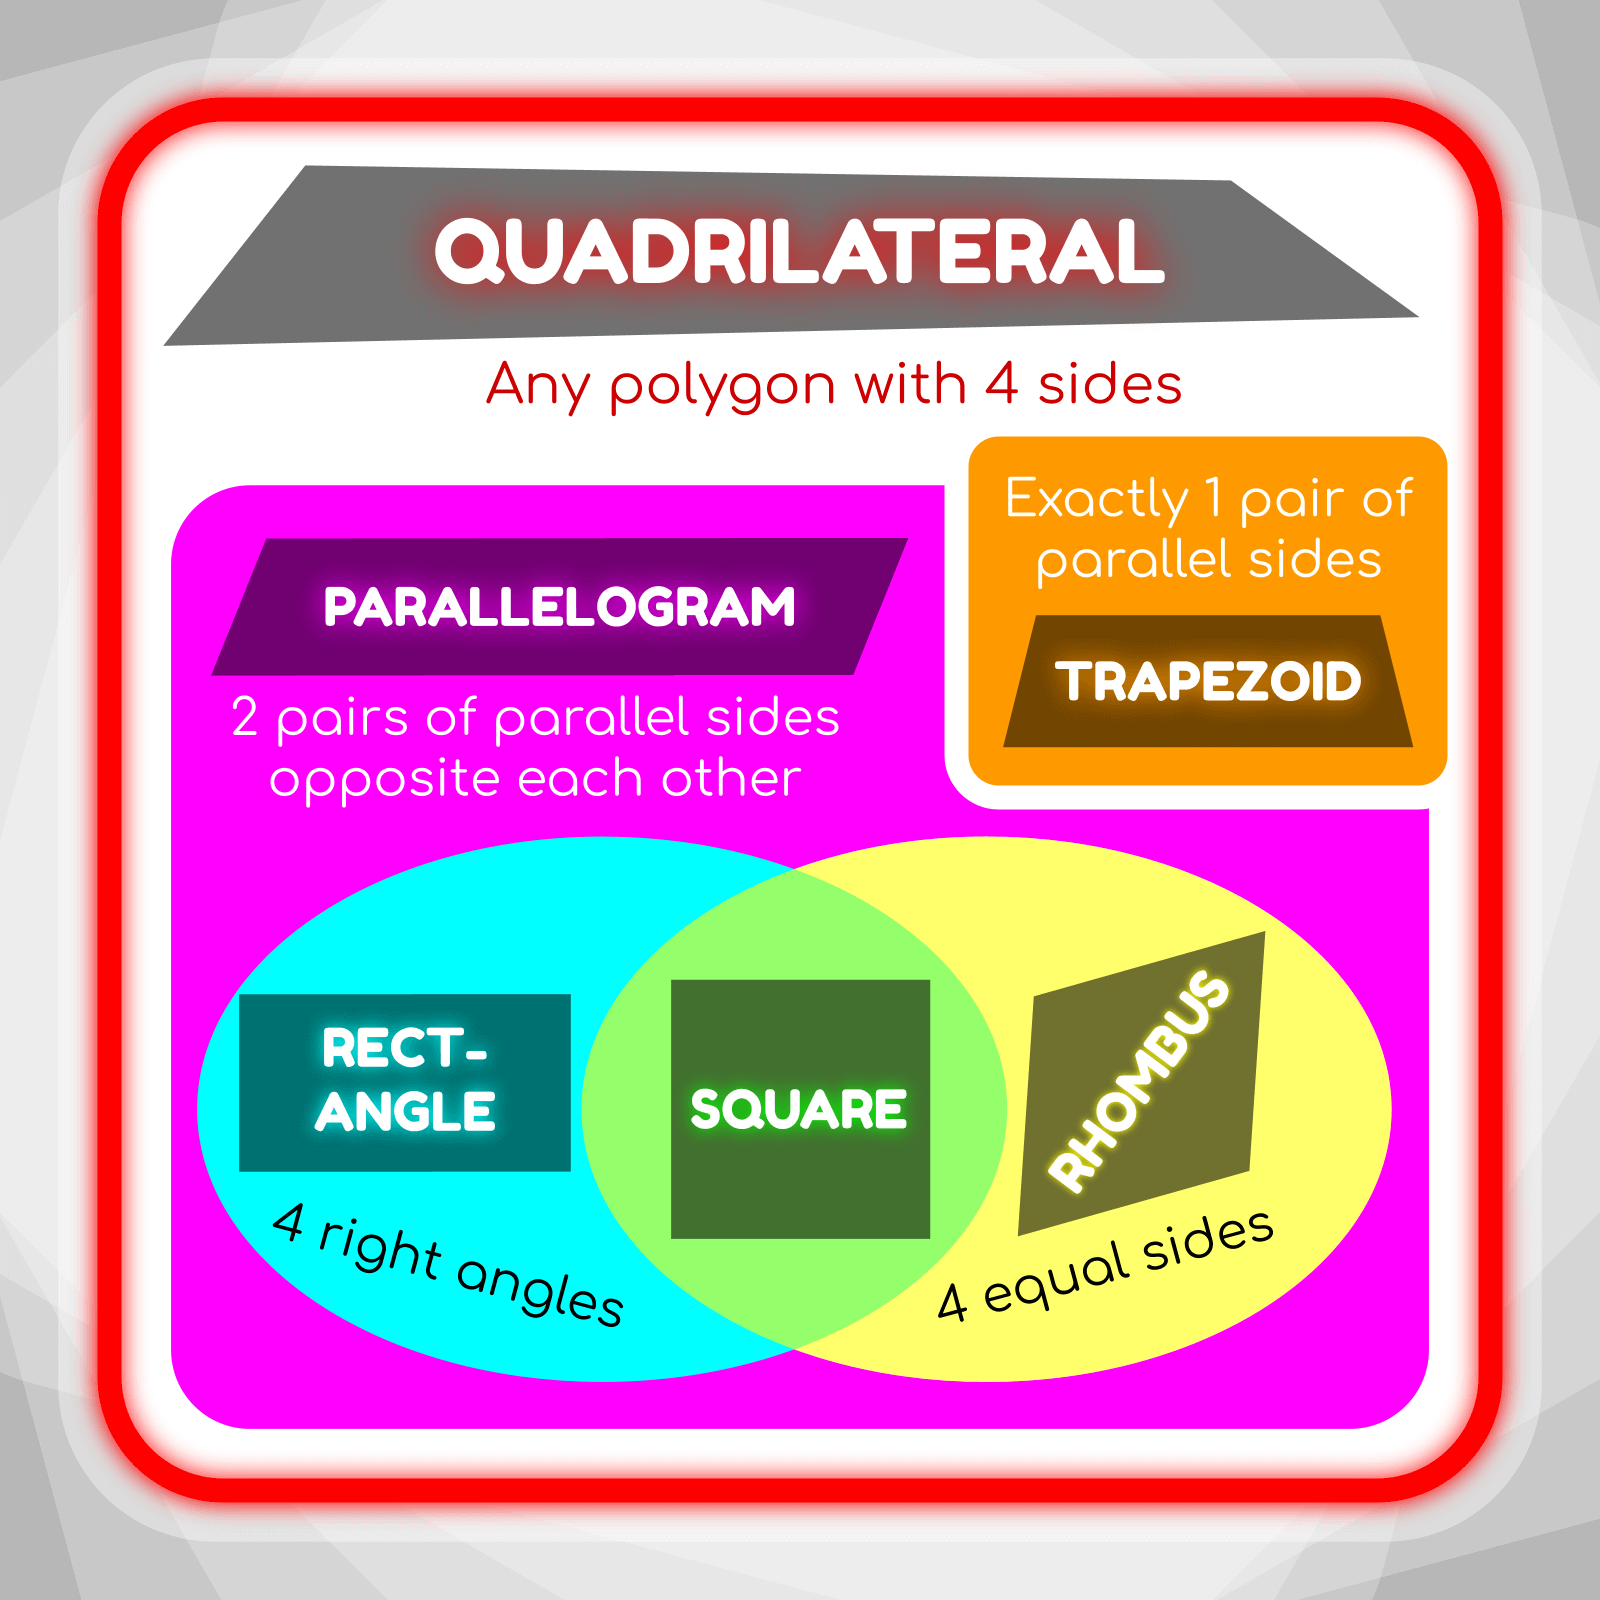 Color Venn diagram with quadrilateral shapes and glowing text